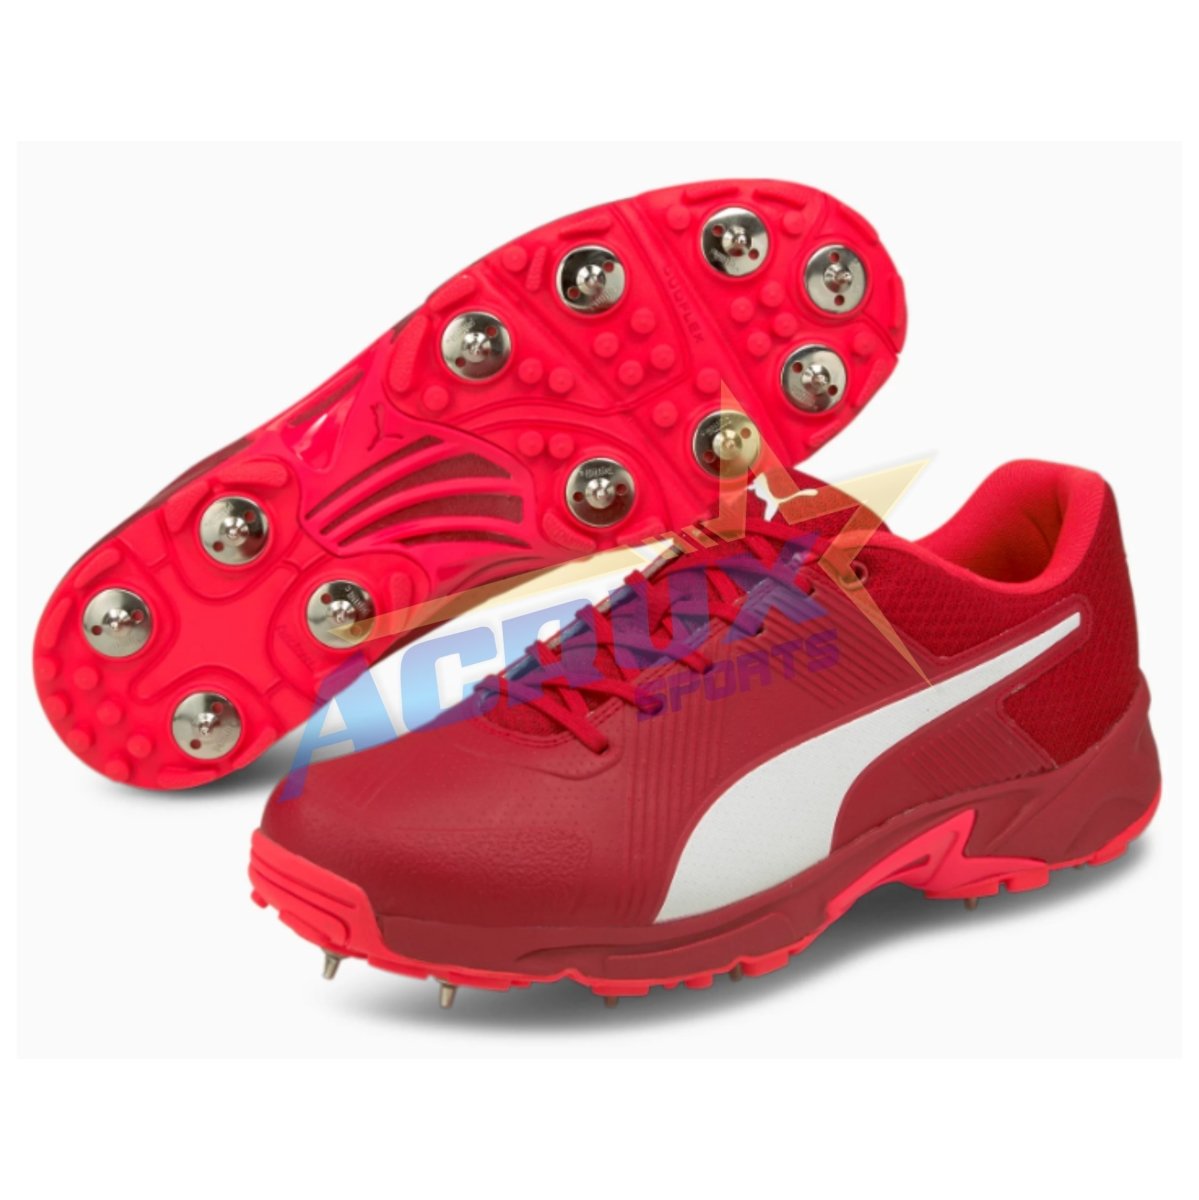 Puma One8 19.2 Cricket Shoes With Steel Spikes.